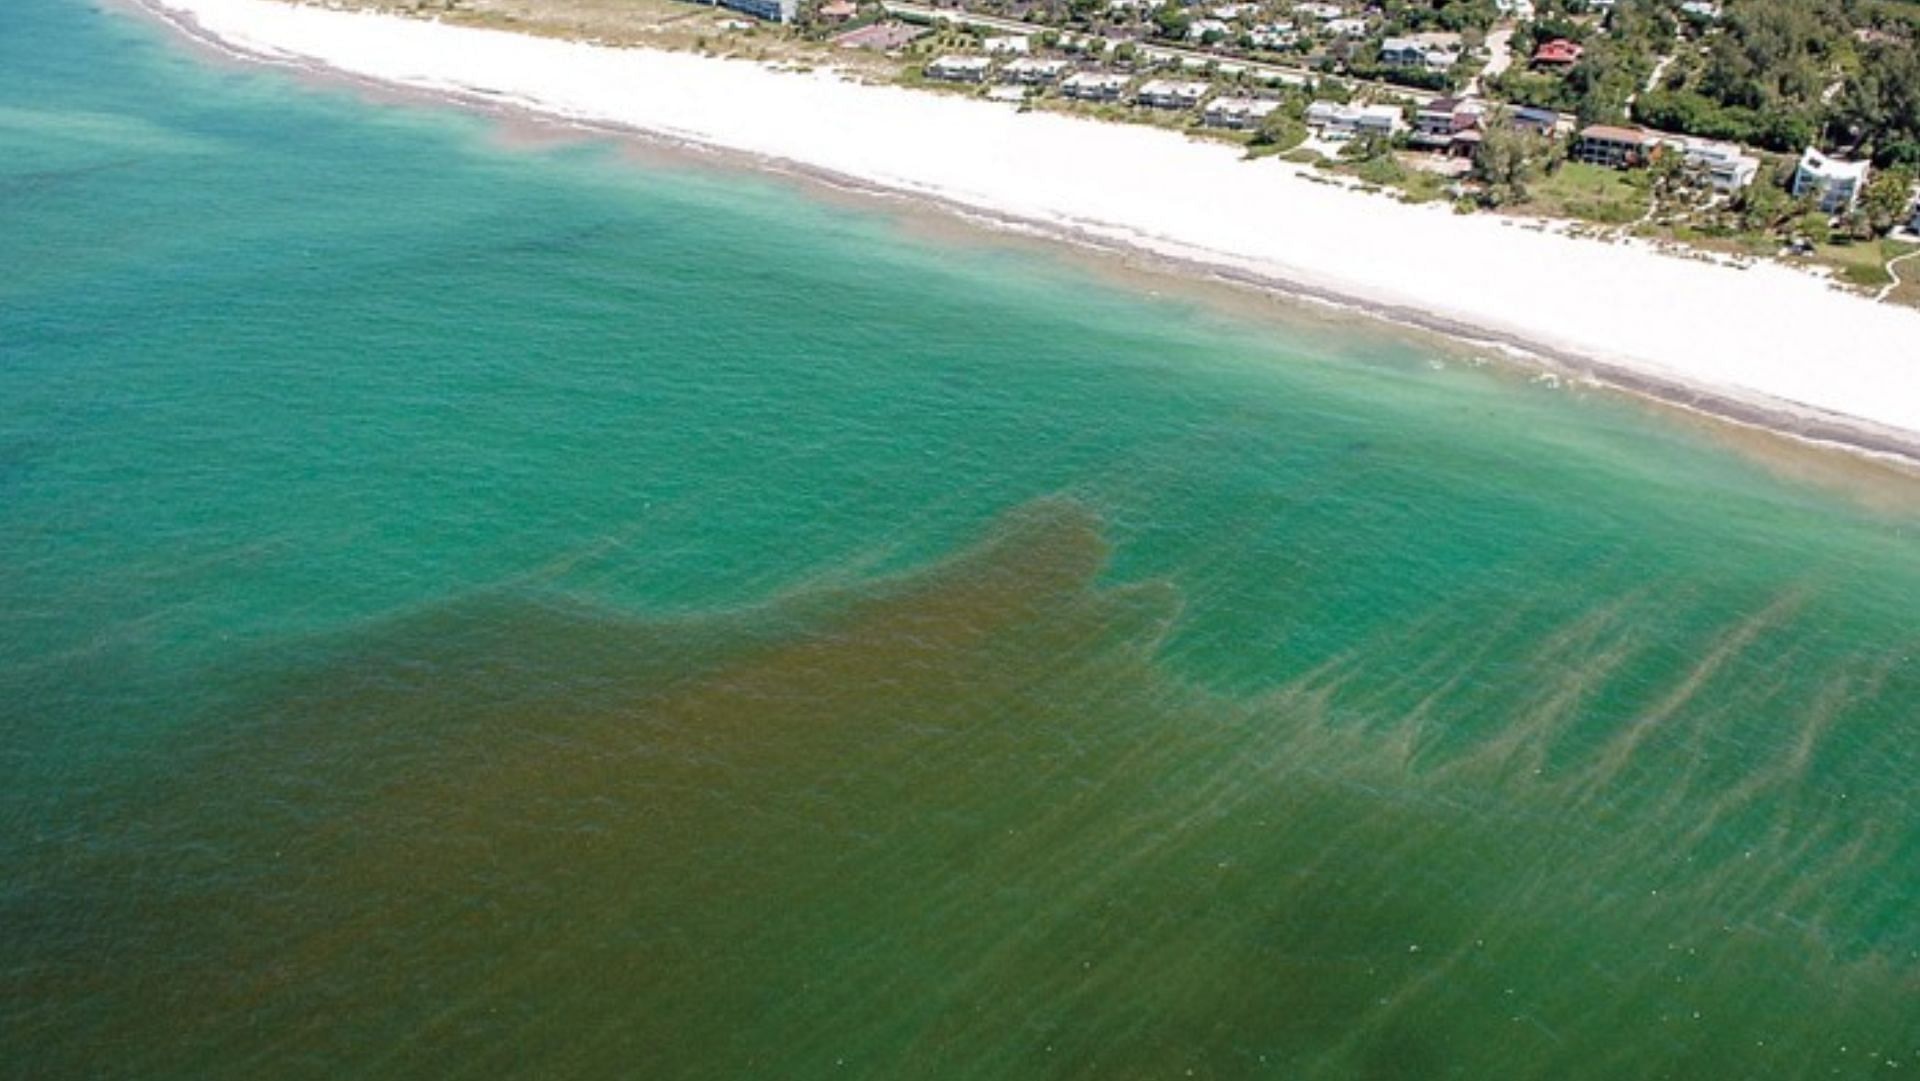 Naples beach in Florida issues high alert due to red tide. (Image via AP)